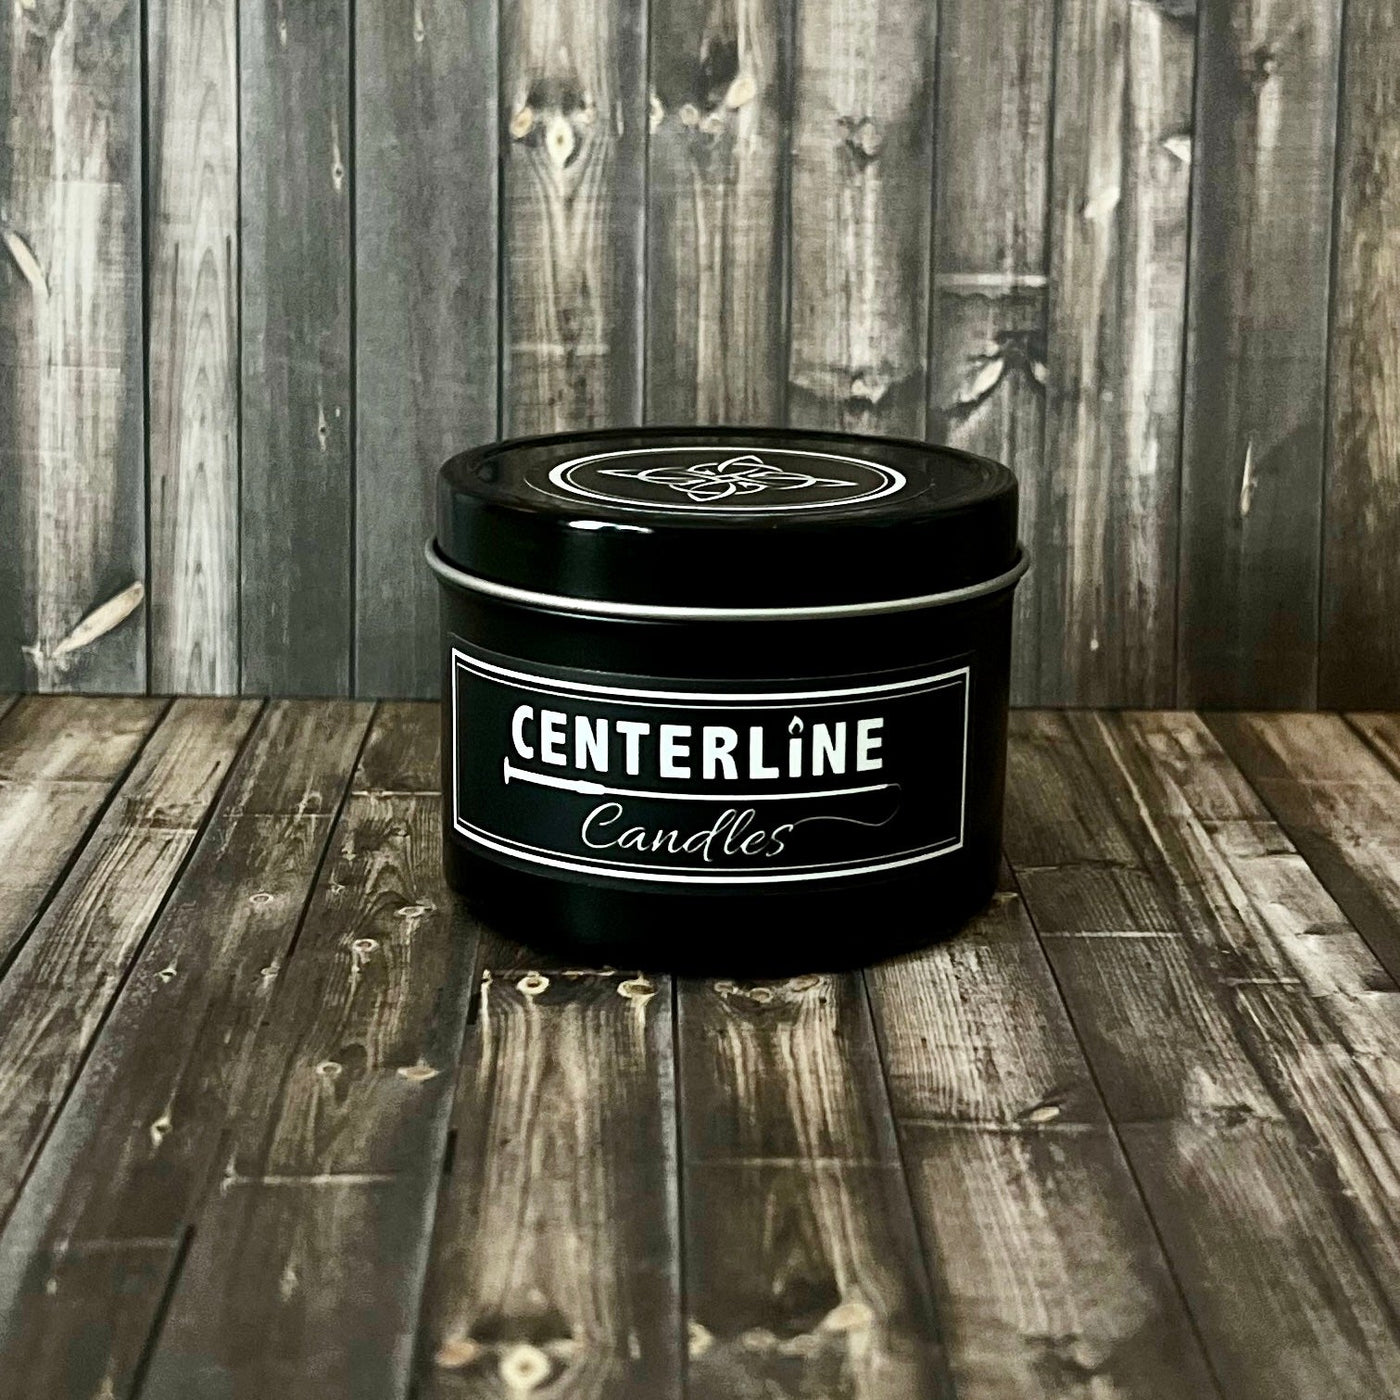 Ranch Morning by Centerline Candles